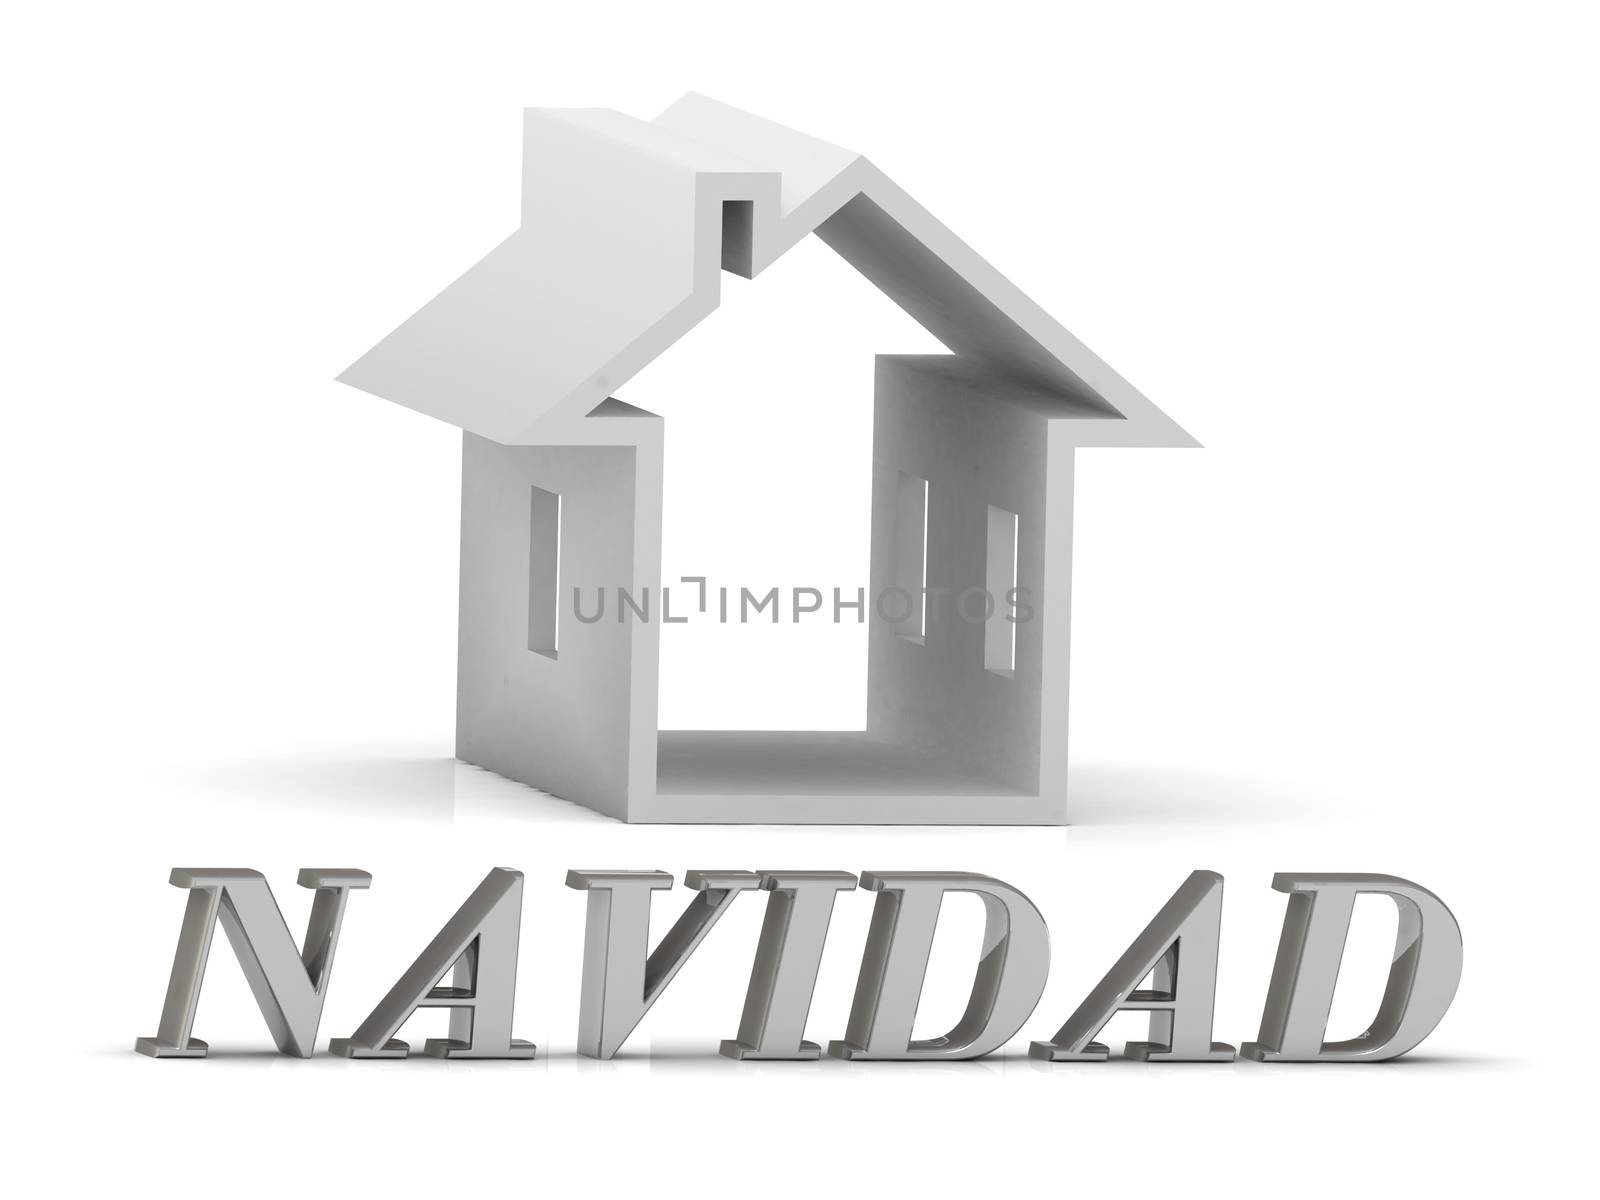 NAVIDAD- inscription of silver letters and white house on white background